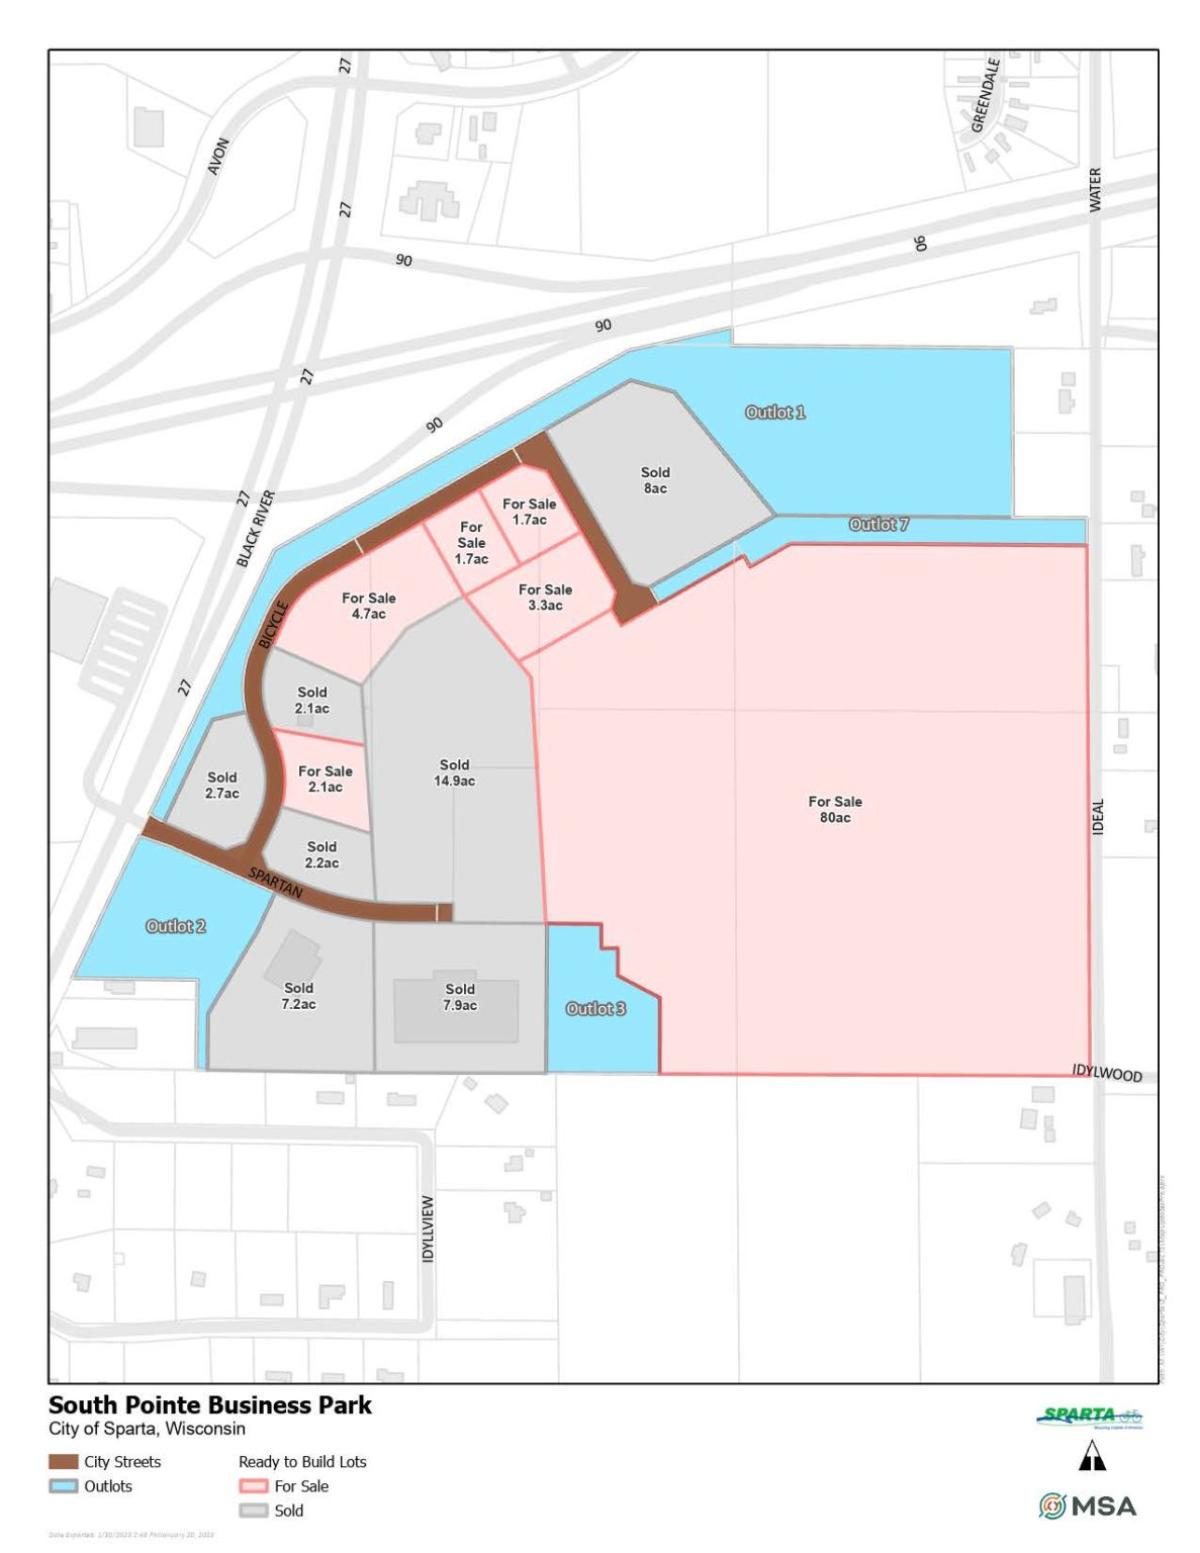 South Pointe Business Park map